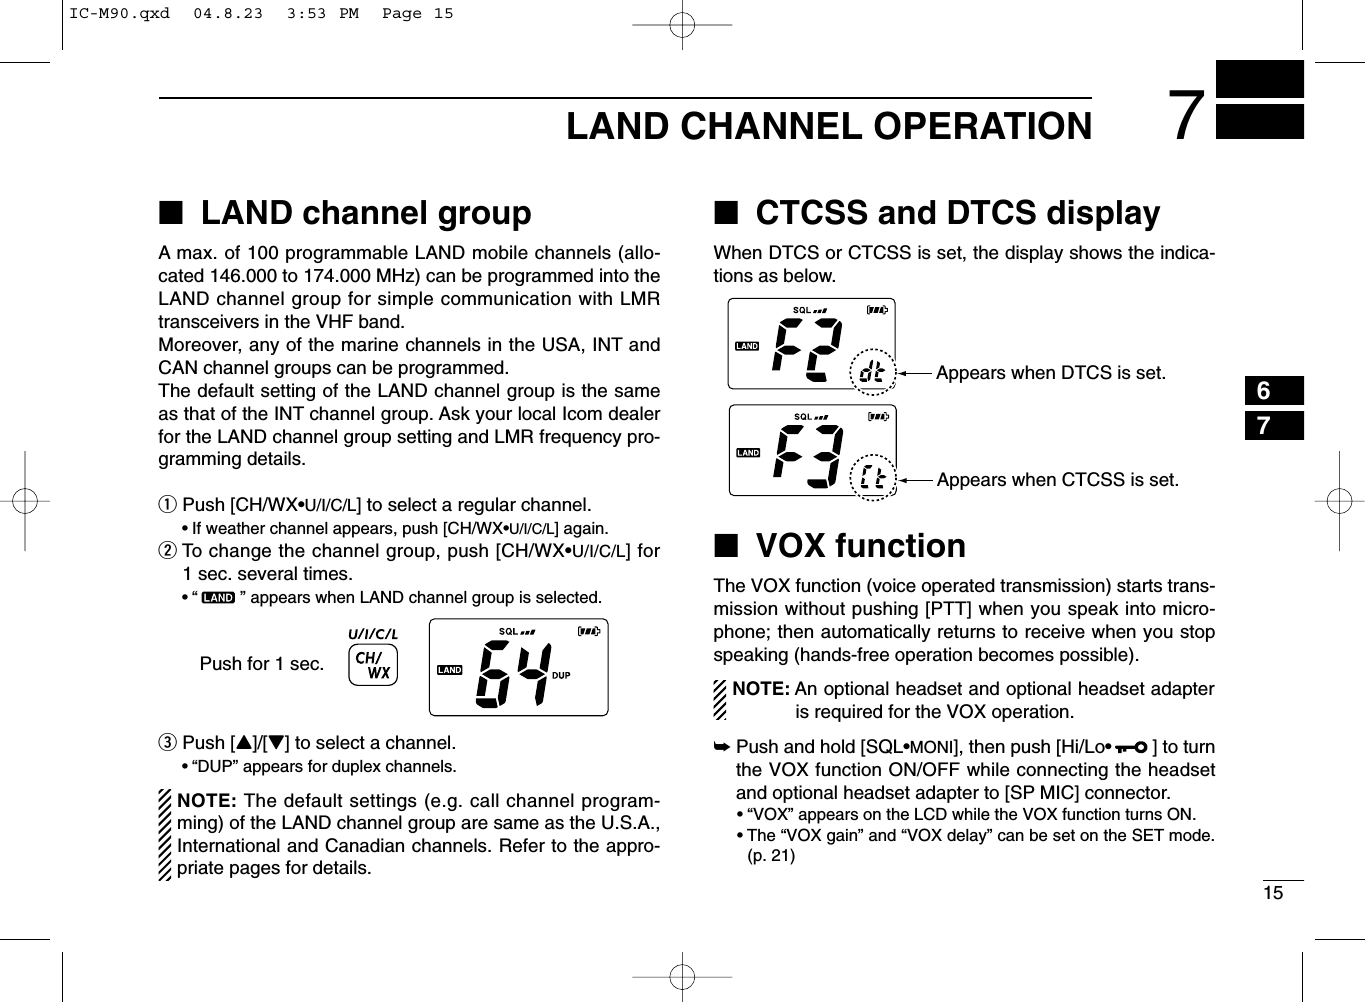 157LAND CHANNEL OPERATION67■LAND channel groupA max. of 100 programmable LAND mobile channels (allo-cated 146.000 to 174.000 MHz) can be programmed into theLAND channel group for simple communication with LMRtransceivers in the VHF band.Moreover, any of the marine channels in the USA, INT andCAN channel groups can be programmed.The default setting of the LAND channel group is the sameas that of the INT channel group. Ask your local Icom dealerfor the LAND channel group setting and LMR frequency pro-gramming details.qPush [CH/WX•U/I/C/L] to select a regular channel.•If weather channel appears, push [CH/WX•U/I/C/L] again.wTo change the channel group, push [CH/WX•U/I/C/L] for1 sec. several times.•“ ” appears when LAND channel group is selected.ePush [Y]/[Z] to select a channel.•“DUP” appears for duplex channels.NOTE: The default settings (e.g. call channel program-ming) of the LAND channel group are same as the U.S.A.,International and Canadian channels. Refer to the appro-priate pages for details.■CTCSS and DTCS displayWhen DTCS or CTCSS is set, the display shows the indica-tions as below.■VOX functionThe VOX function (voice operated transmission) starts trans-mission without pushing [PTT] when you speak into micro-phone; then automatically returns to receive when you stopspeaking (hands-free operation becomes possible).NOTE: An optional headset and optional headset adapteris required for the VOX operation.➥Push and hold [SQL•MONI], then push [Hi/Lo•] to turnthe VOX function ON/OFF while connecting the headsetand optional headset adapter to [SP MIC] connector.• “VOX” appears on the LCD while the VOX function turns ON.• The “VOX gain” and “VOX delay” can be set on the SET mode.(p. 21)Push for 1 sec.Appears when DTCS is set.Appears when CTCSS is set.IC-M90.qxd  04.8.23  3:53 PM  Page 15